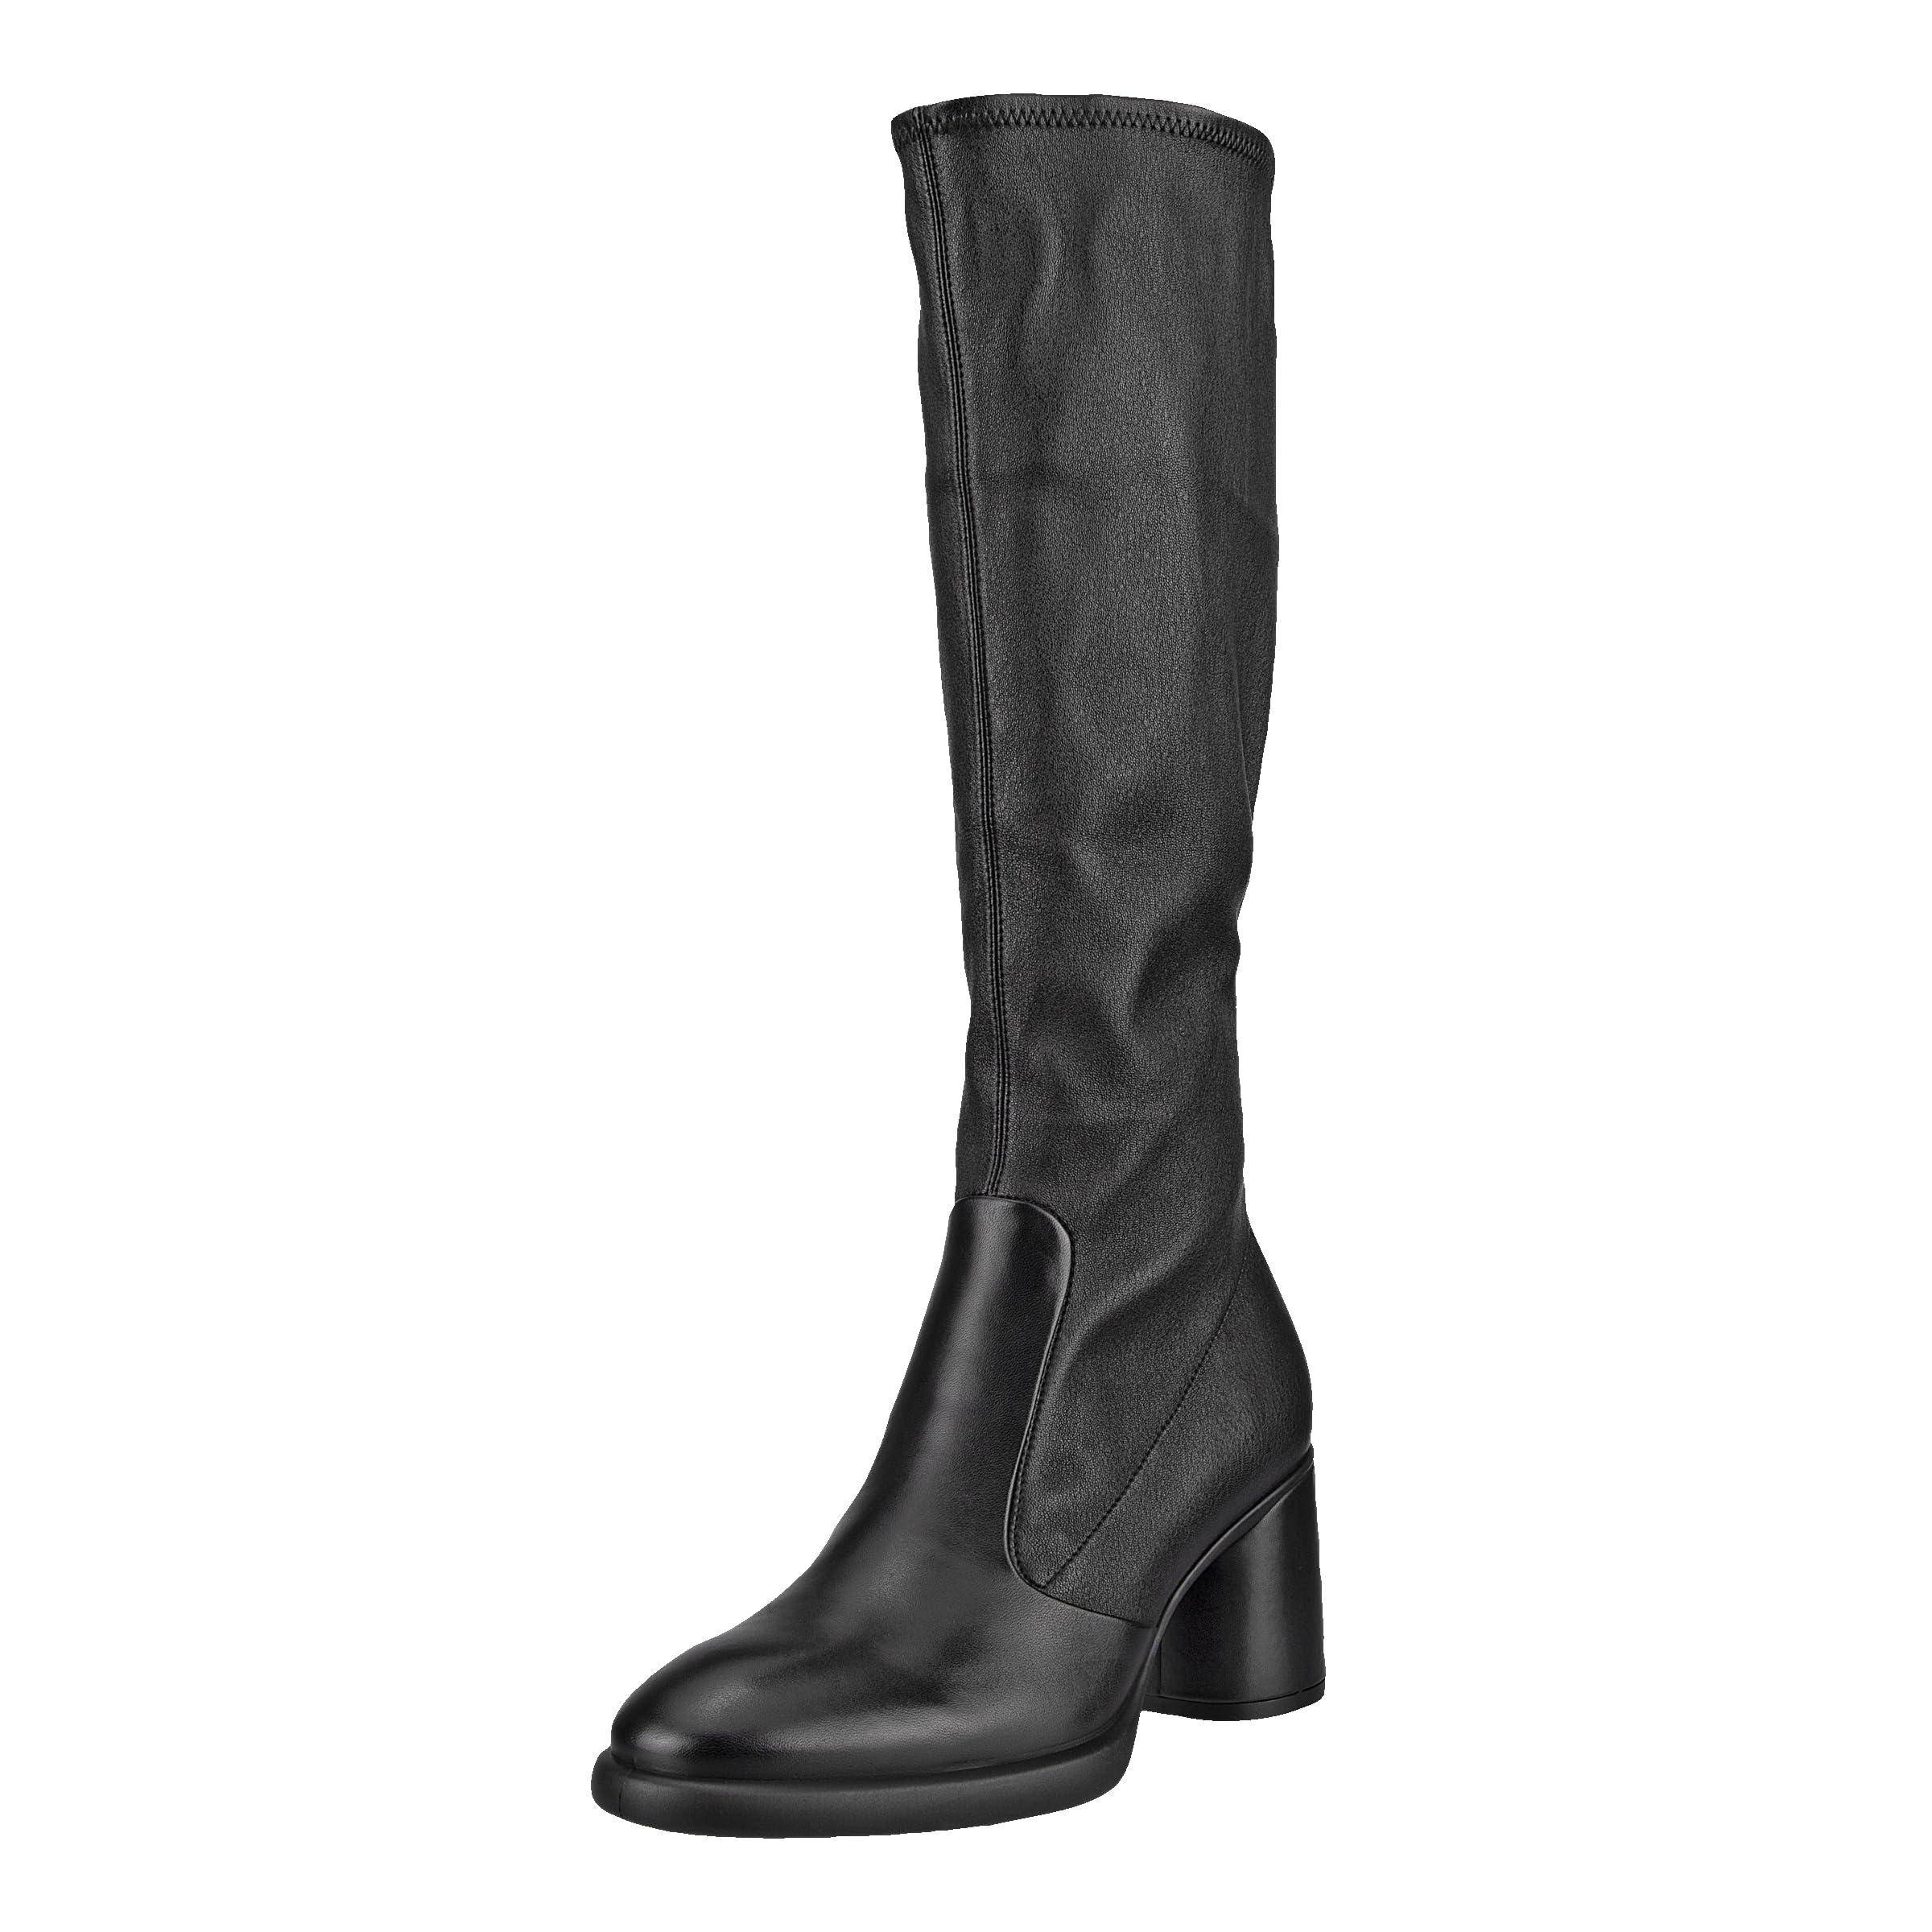 Ecco Sculpted Luxury 55mm Knee High Boot in Black | Lyst